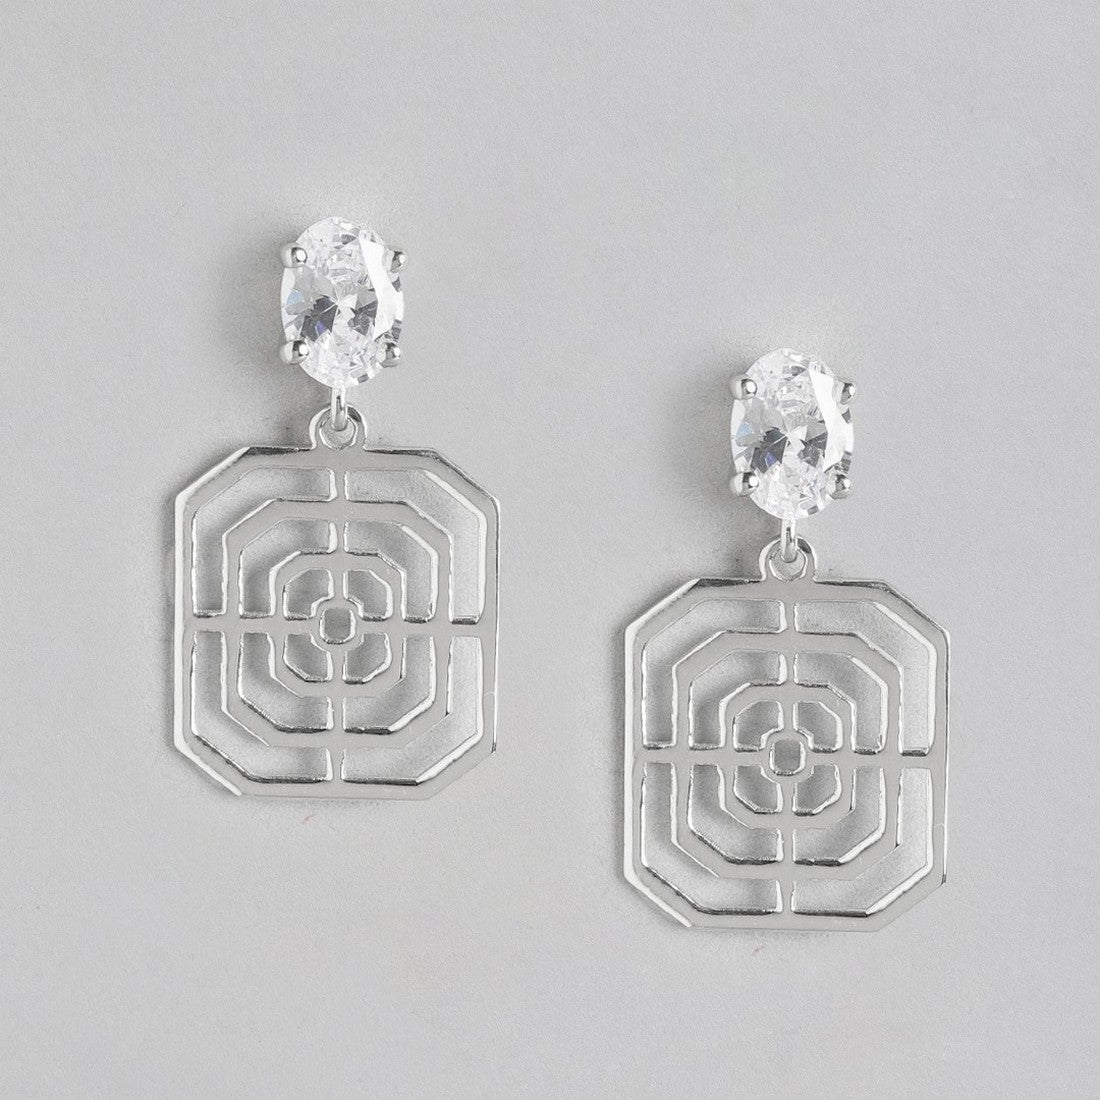 Solitaire Geometric Rhodium Plated 925 Sterling Silver Drop Earrings